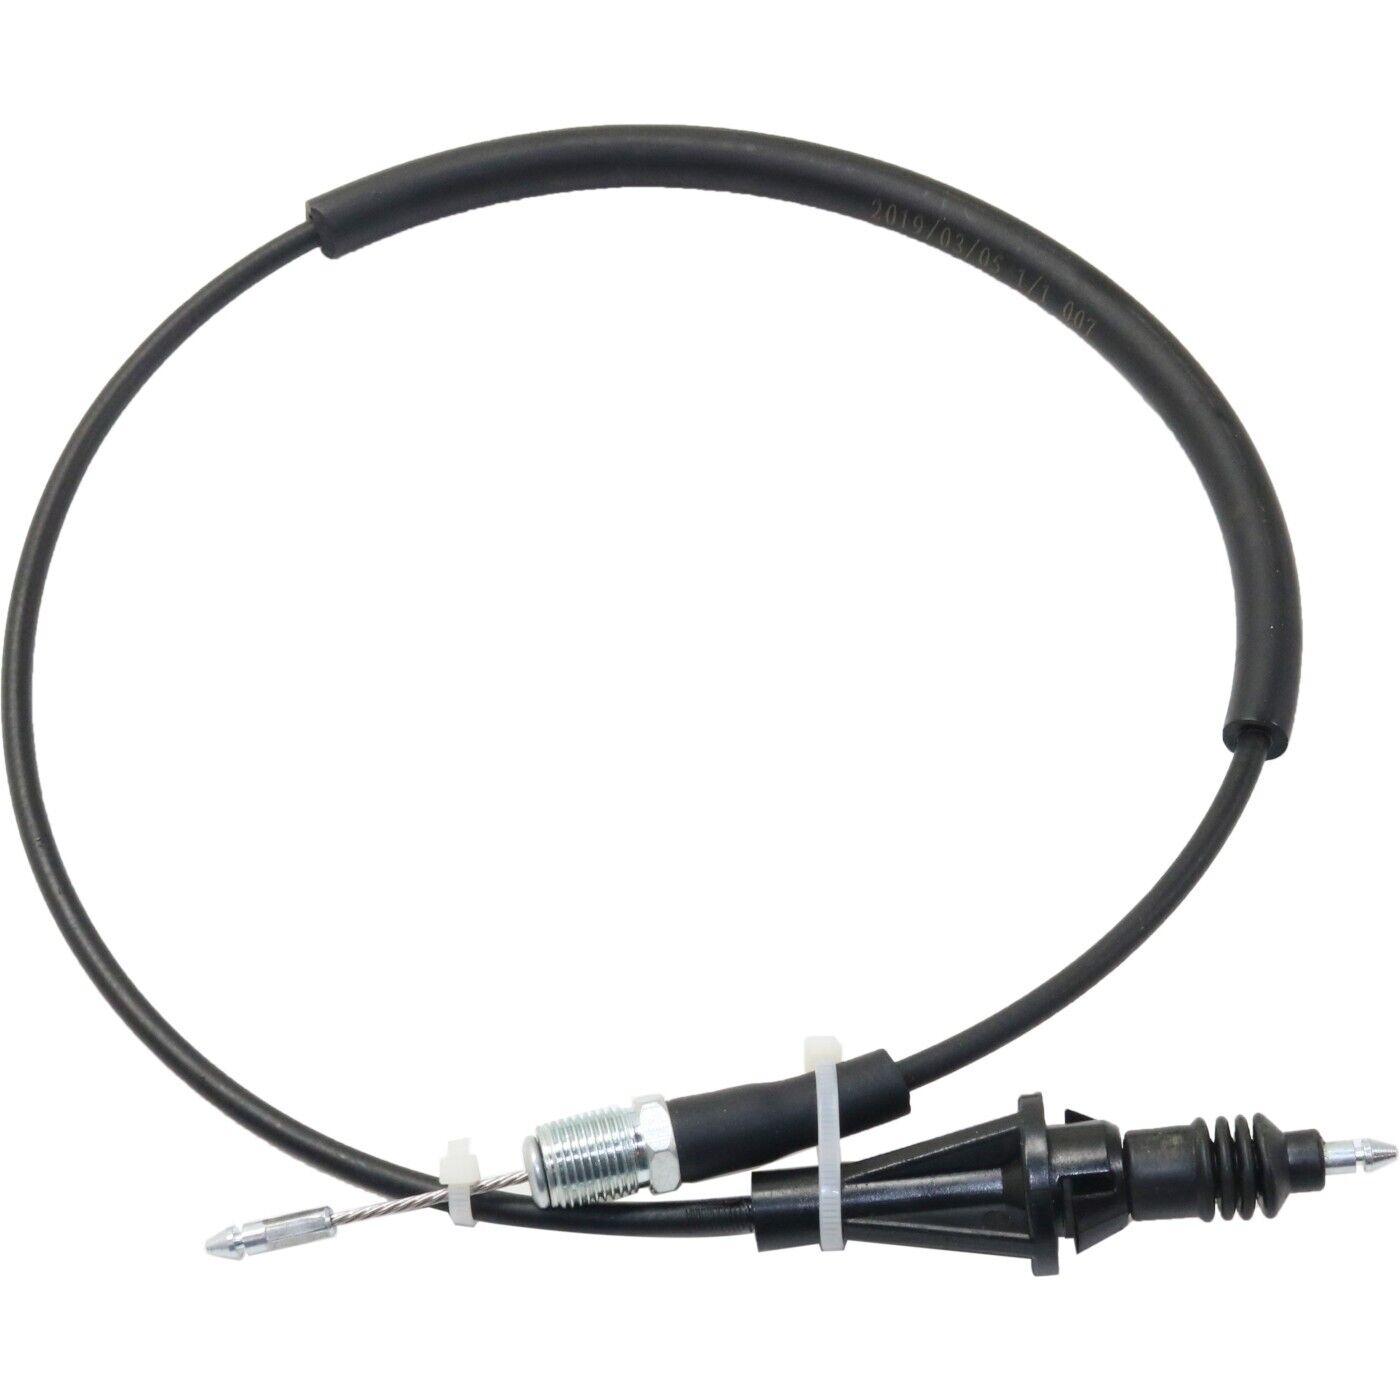 4WD Actuator Cable for Chevy S10 Pickup S-10 BLAZER S15 Jimmy 15654073 Chevrolet